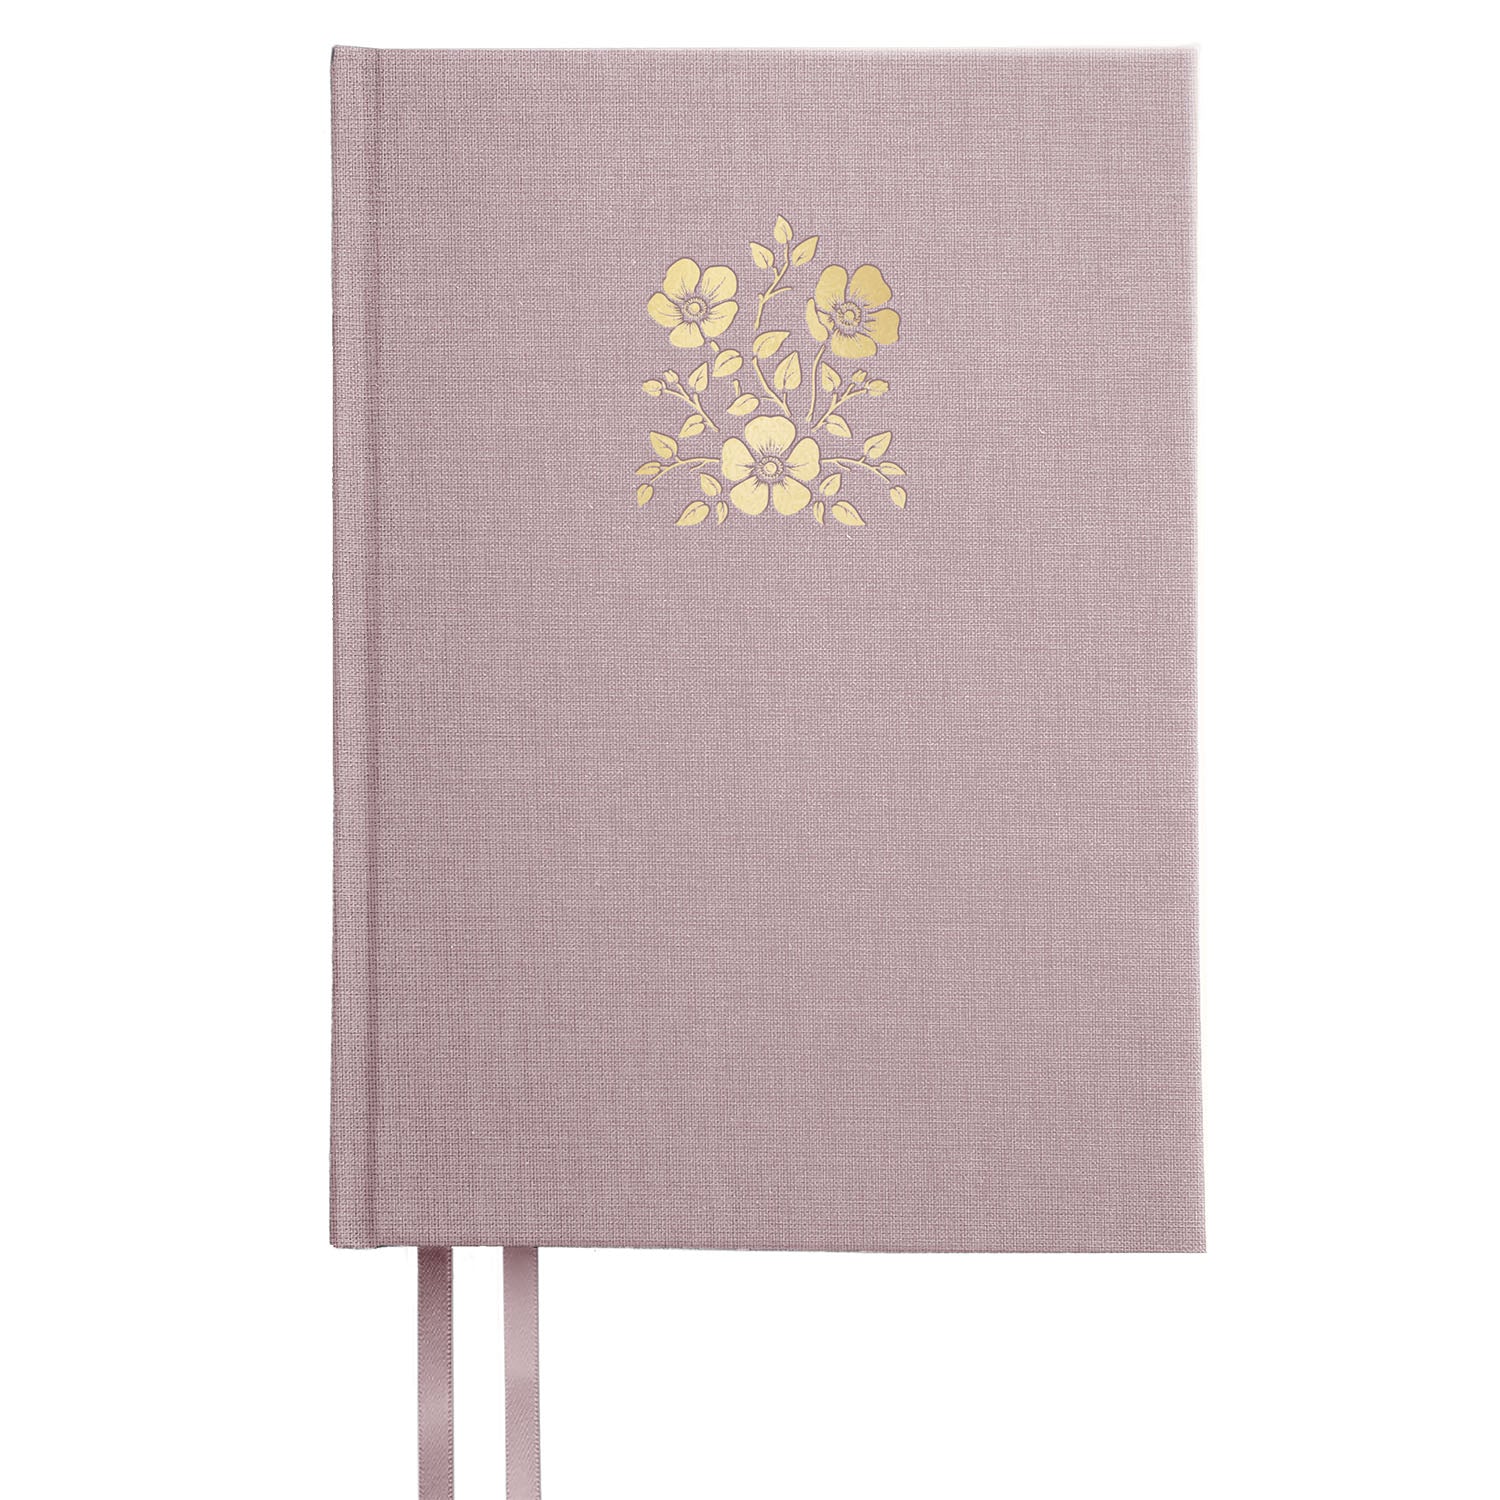 Floriculture - Dotted Notebook